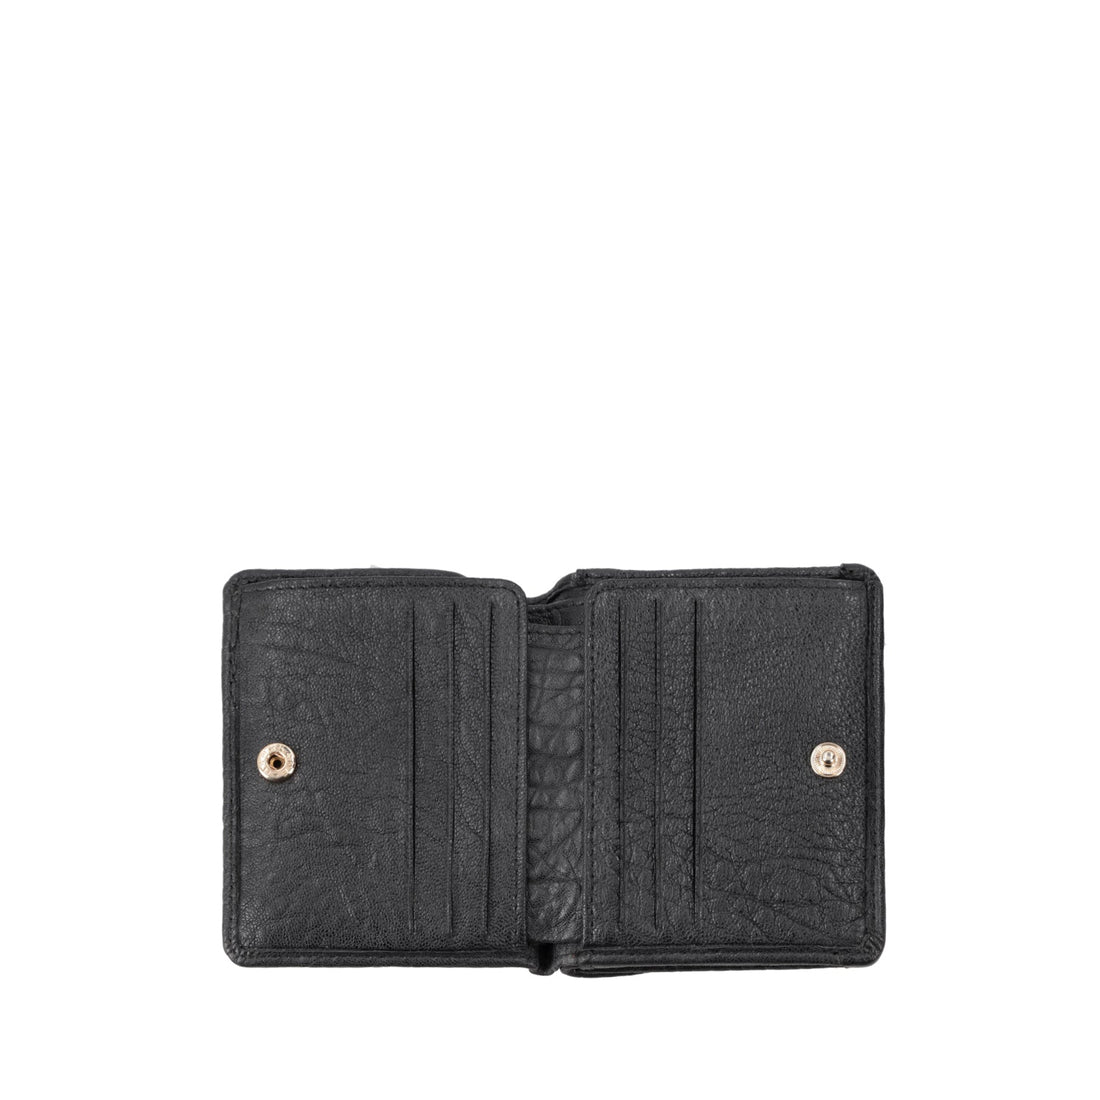 BLACK SMALL GLADIOLO LEATHER WALLET